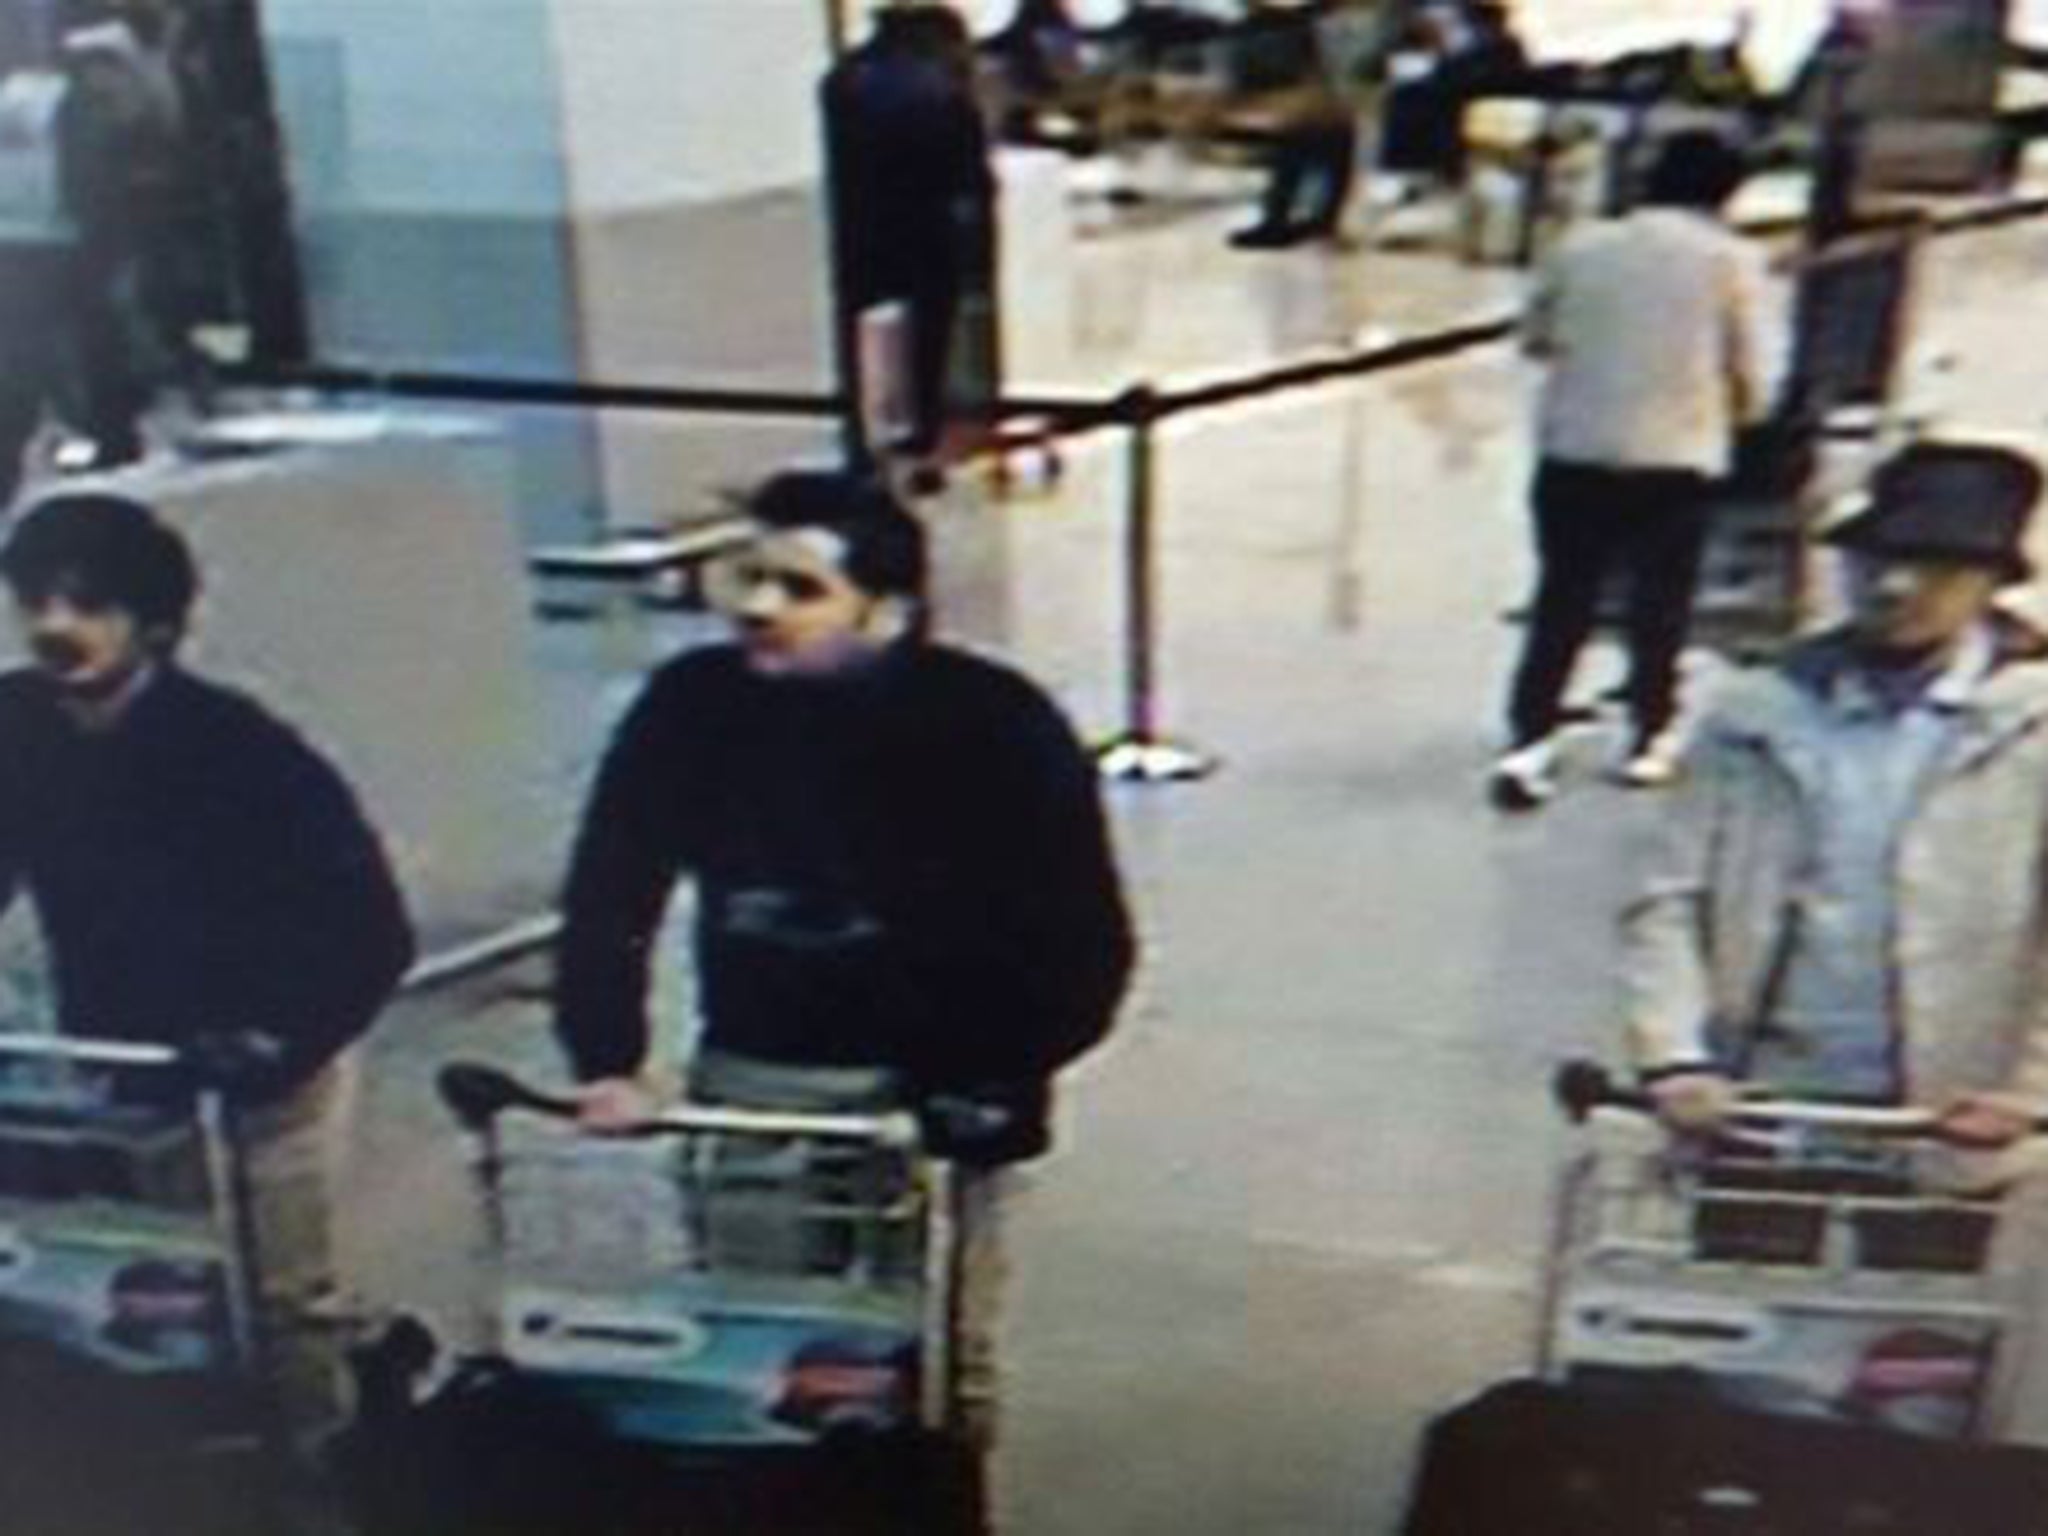 Airport CCTV footage shows three of the suspects